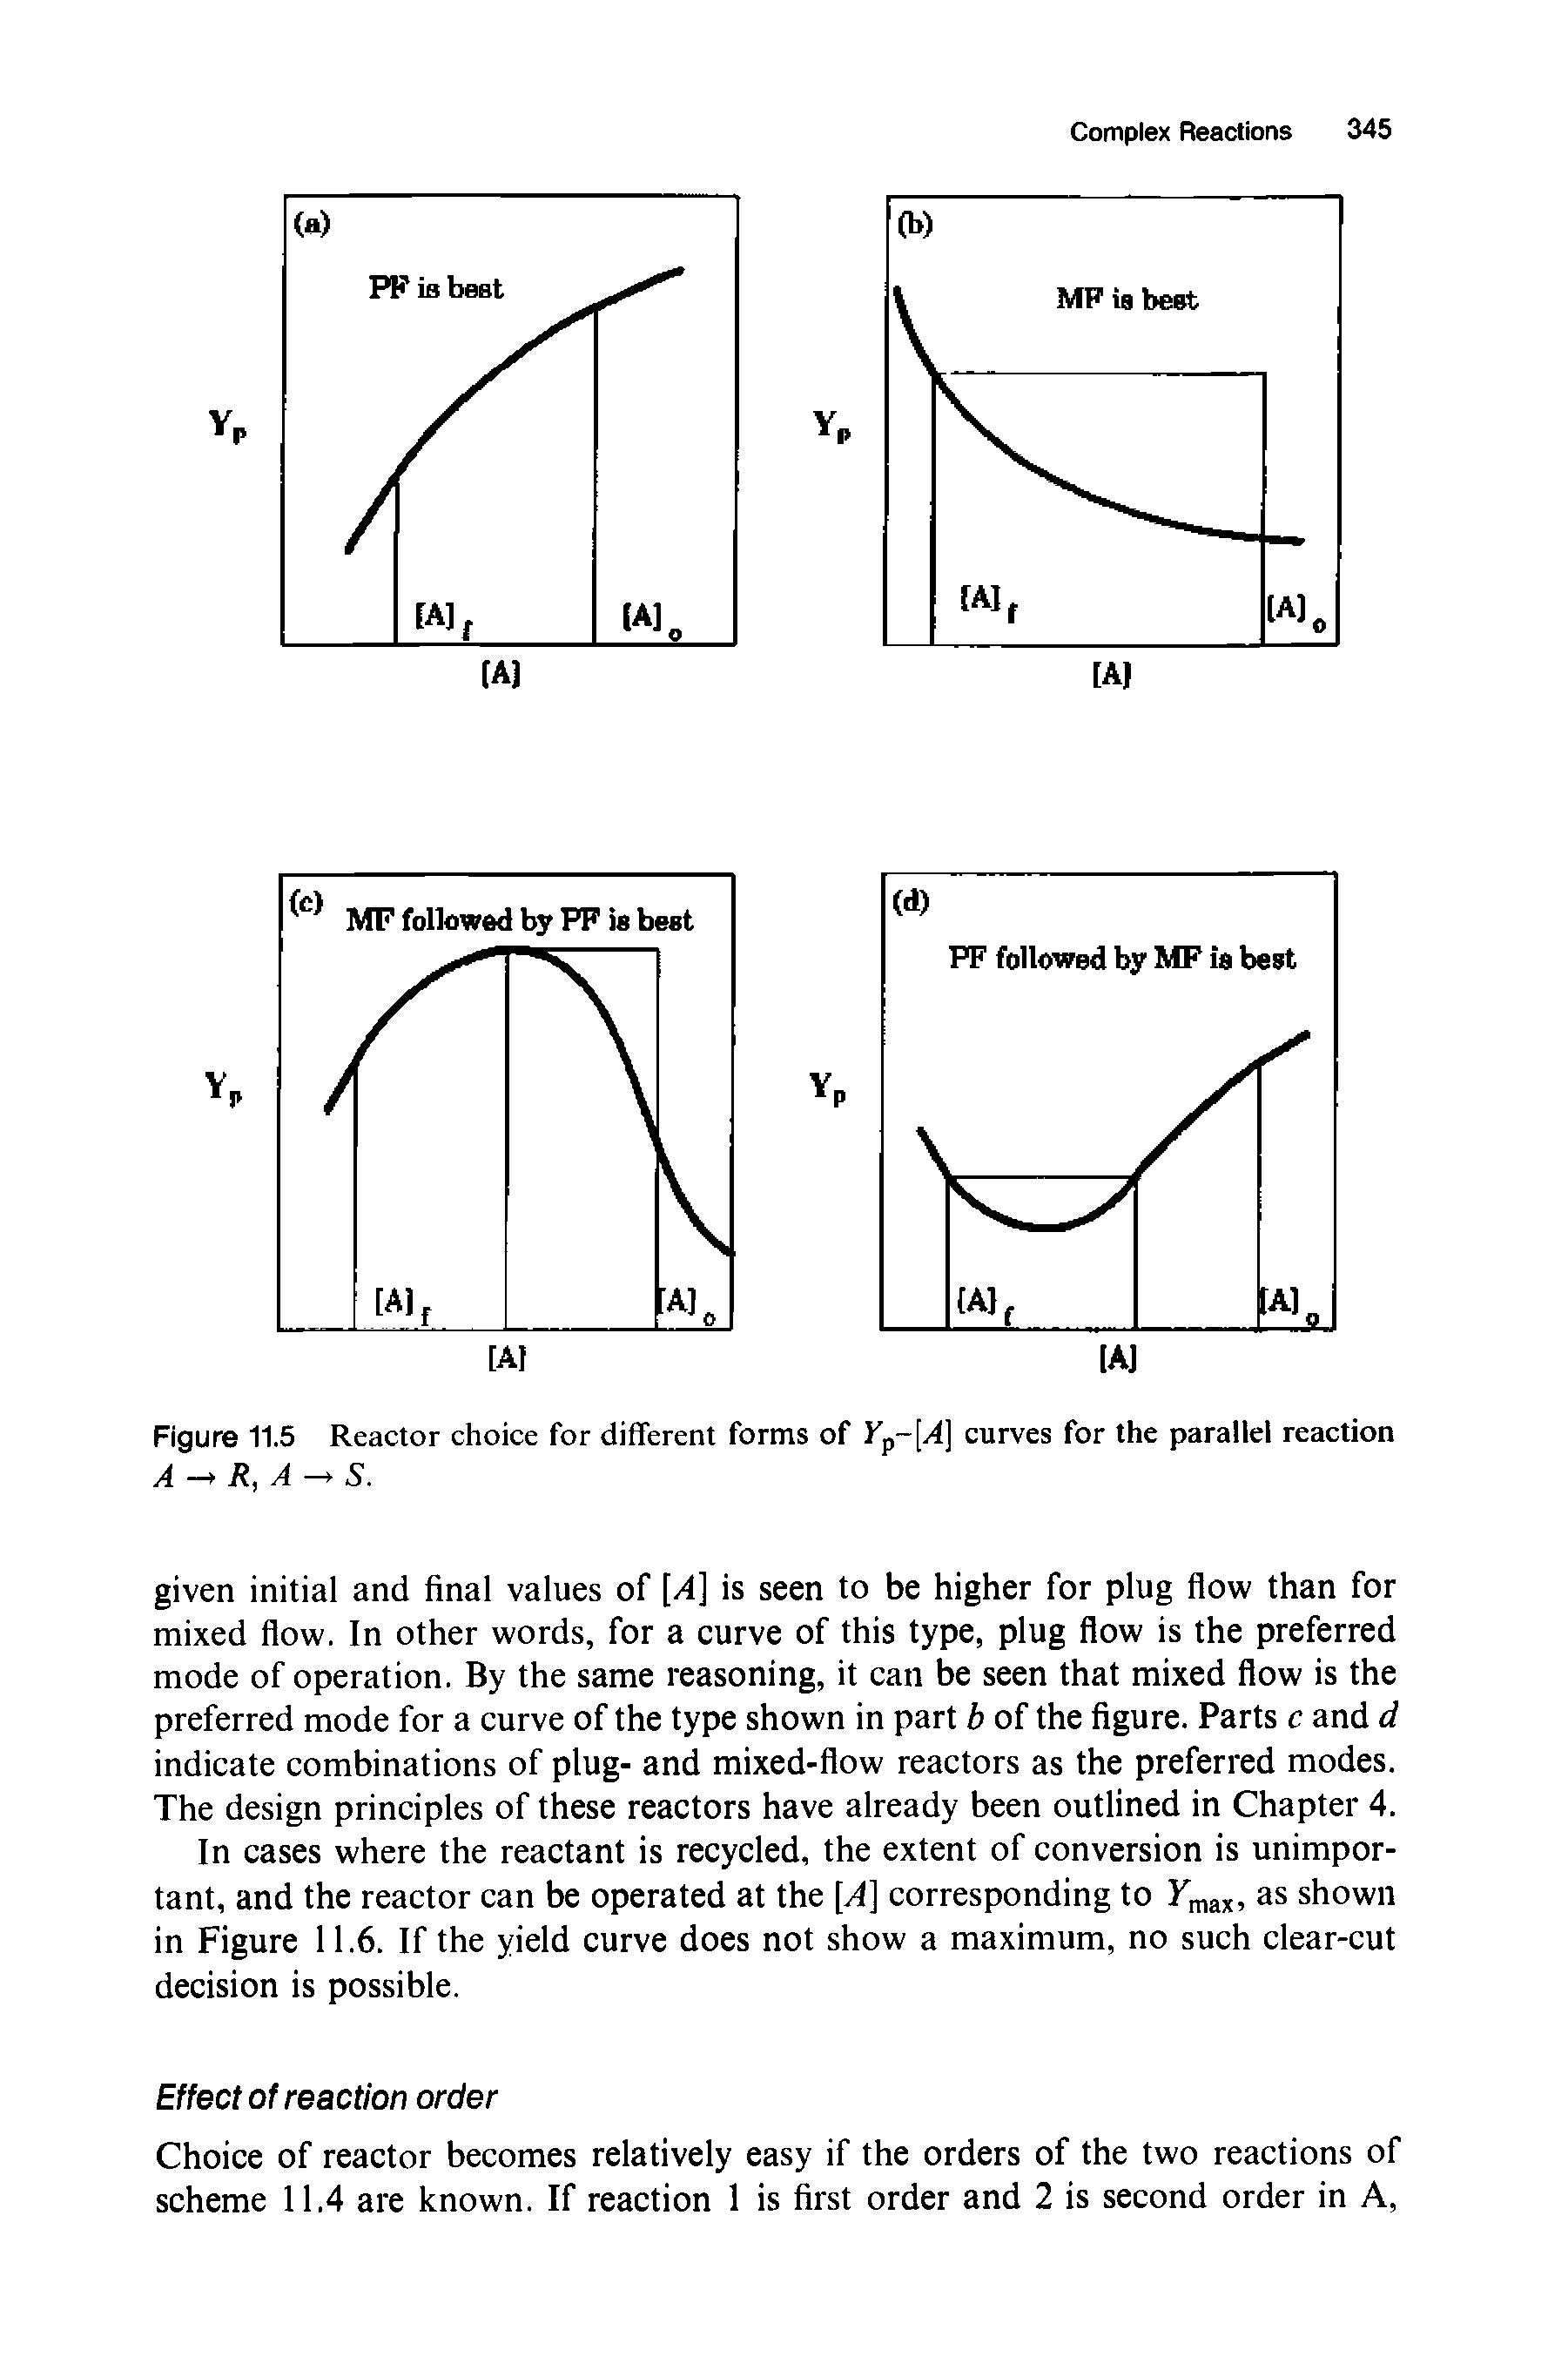 Figure 11.5 Reactor choice for different forms of yp [A] curves for the parallel reaction A- R,A- S.